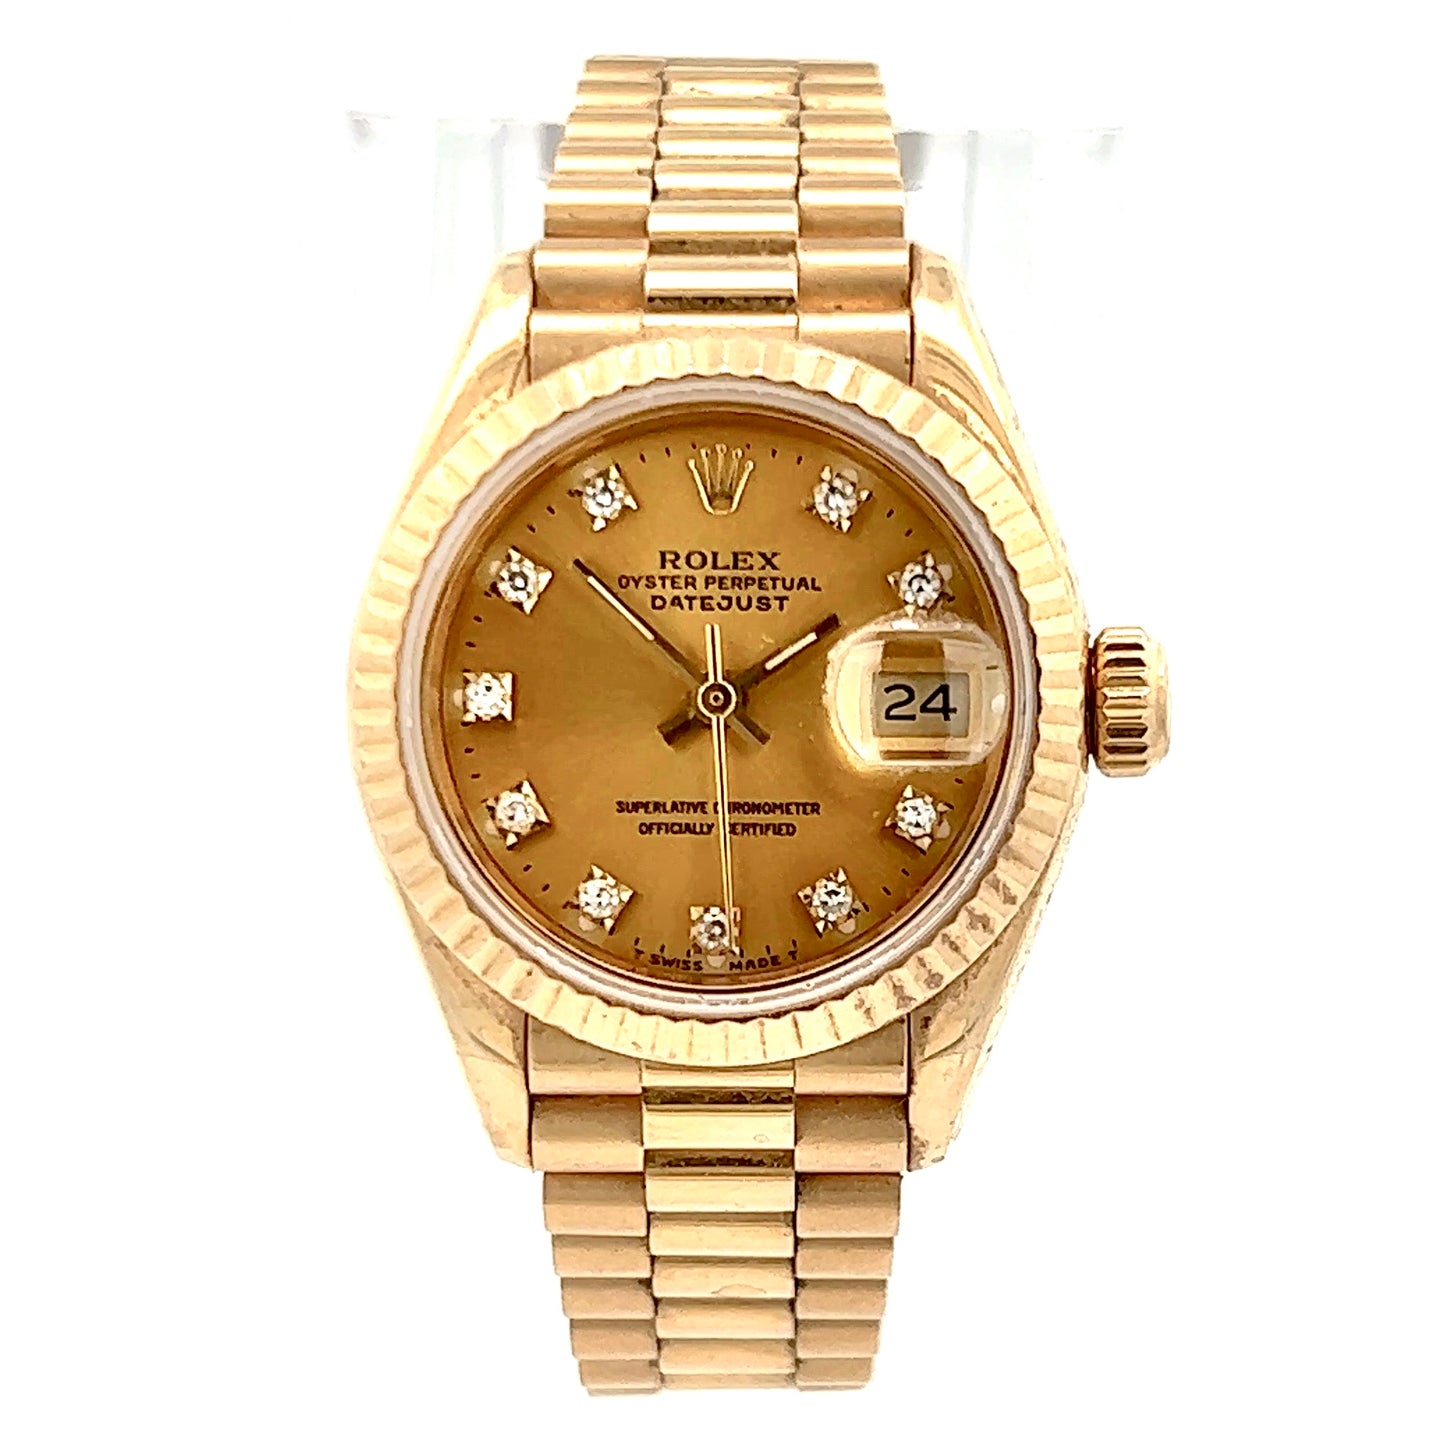 ROLEX OYSTER PERPETUAL DATEJUST Presidential 26mm 18K Yellow Gold FACTORY DIAMOND Watch